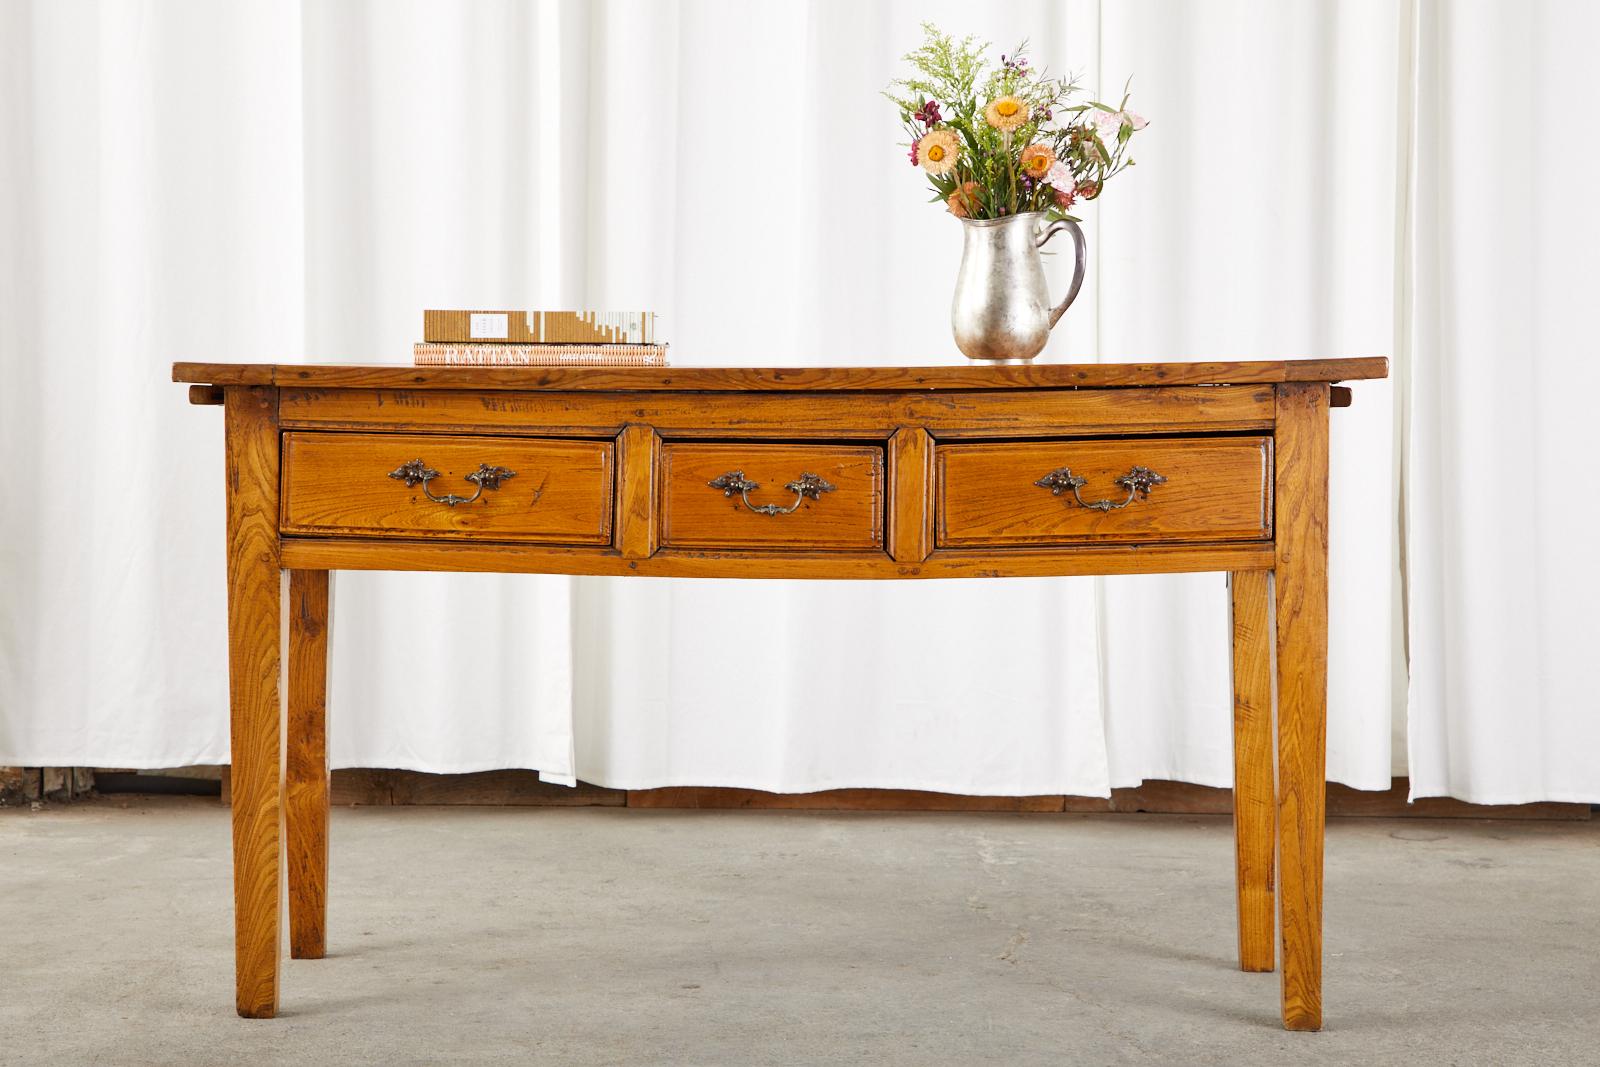 Distinctive 19th century country French Provincial console table crafted from pine. Originally a kitchen work table or server having pull-out cutting boards on each side. The thick plank top has breadboard ends. The case is fronted by three storage